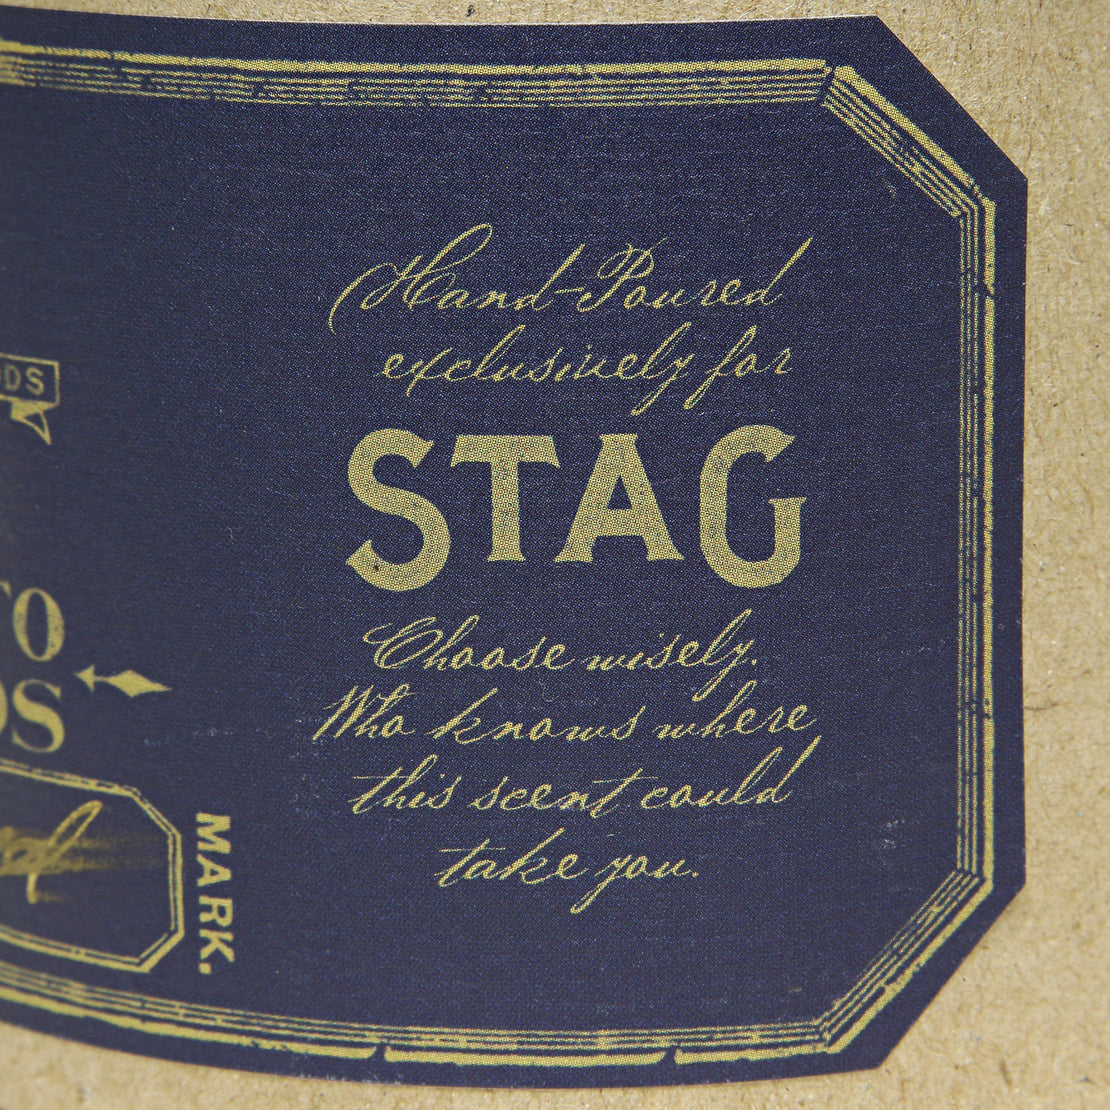 Desert Road for STAG Candle - We Took To The Woods - STAG Provisions - Home - Fragrance - Candle